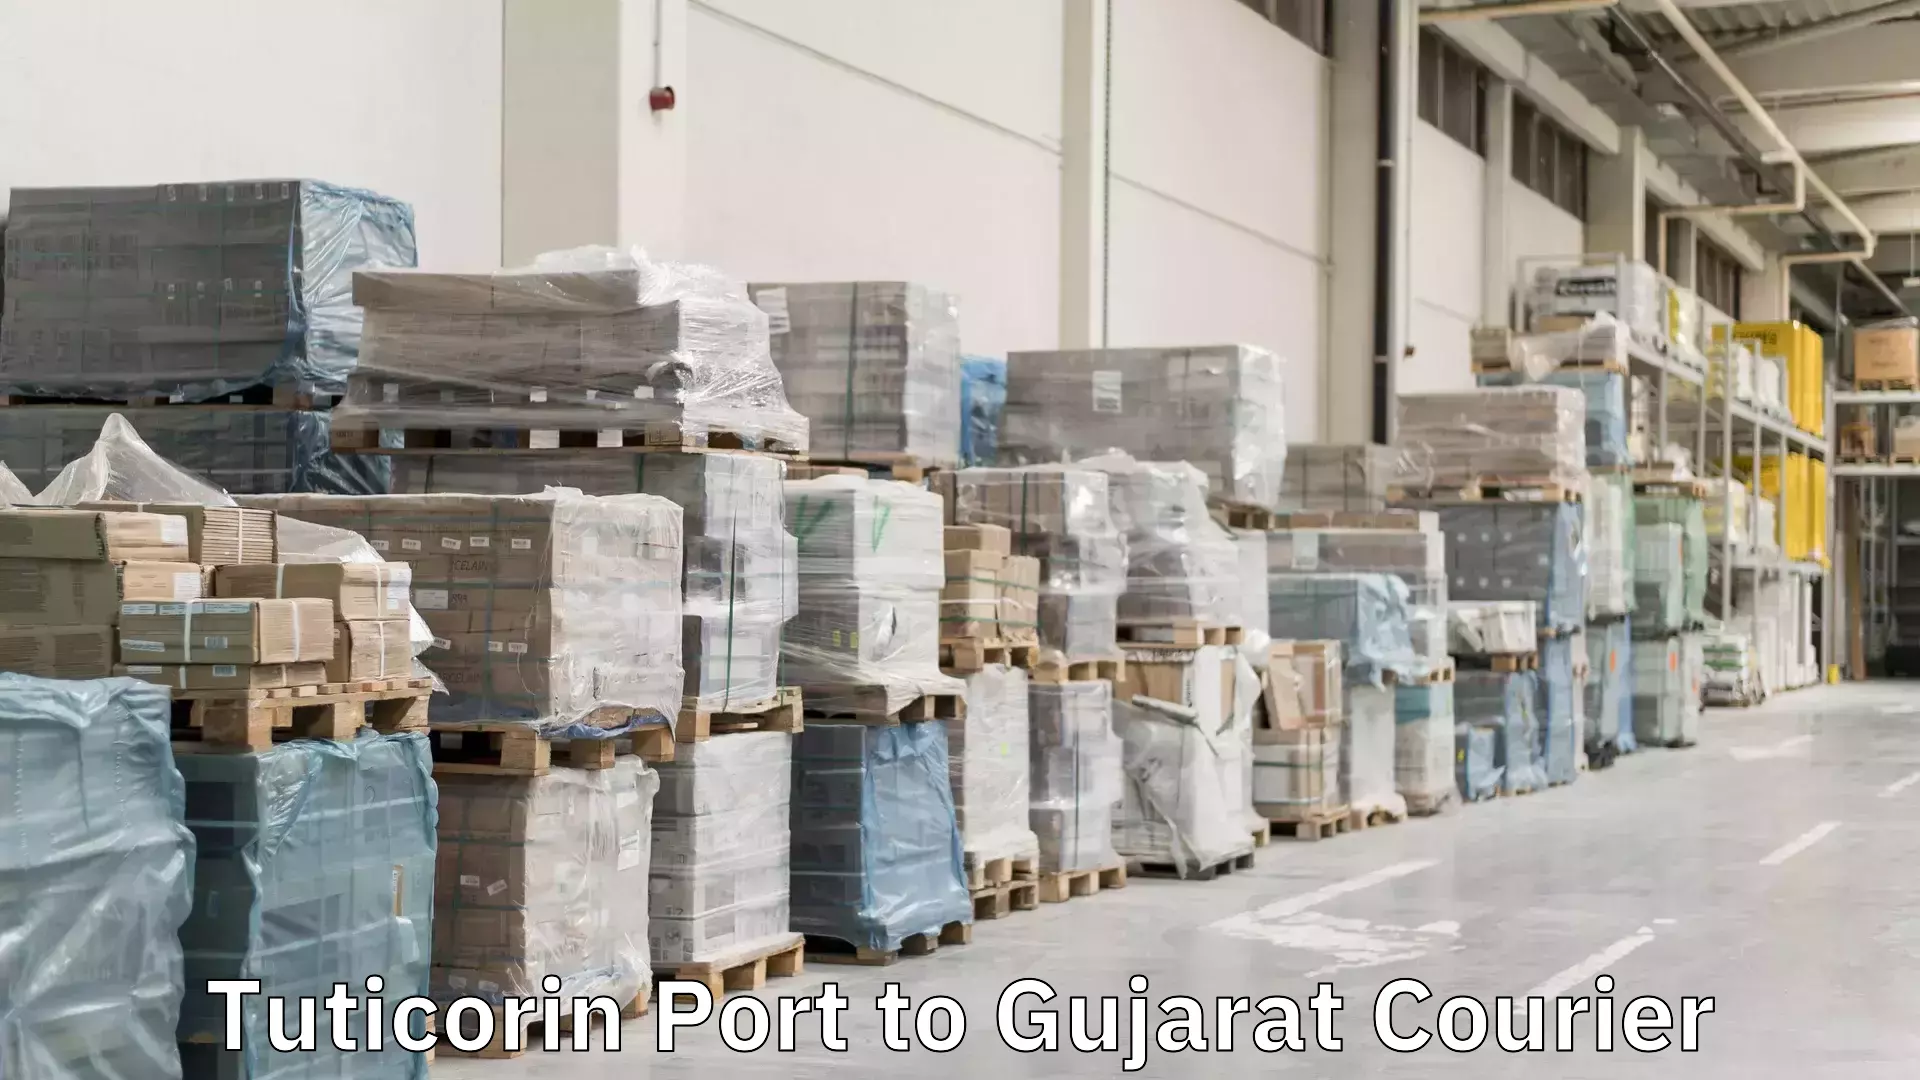 On-call courier service Tuticorin Port to Gujarat